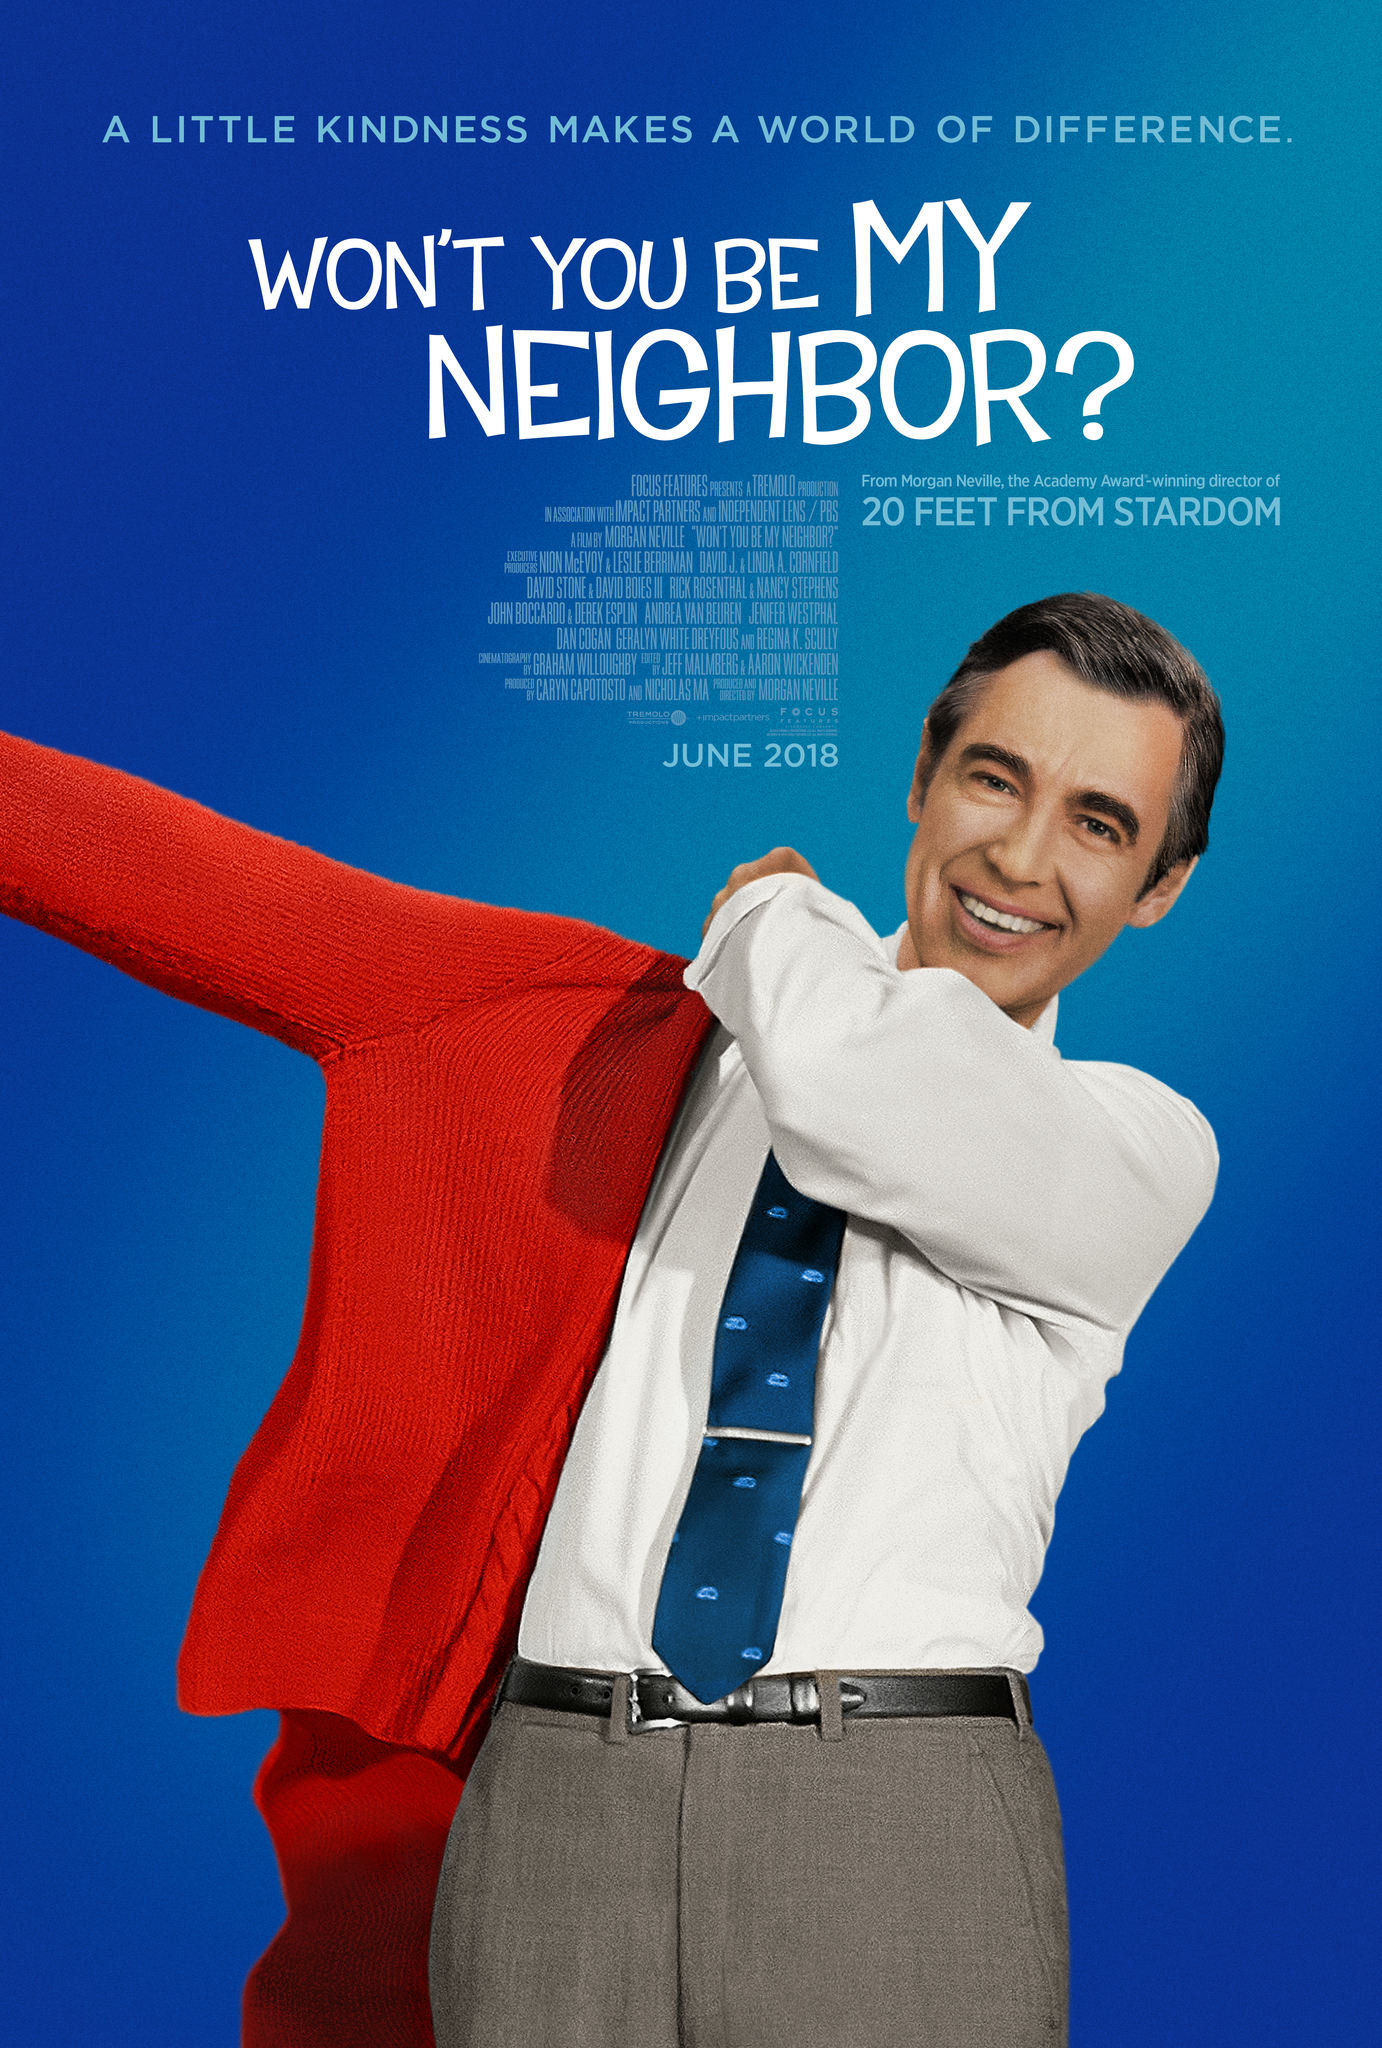 Filmmaker Morgan Neville examines the life and legacy of Fred Rogers, the beloved host of the popular children's television show Mister Rogers' Neighborhood.